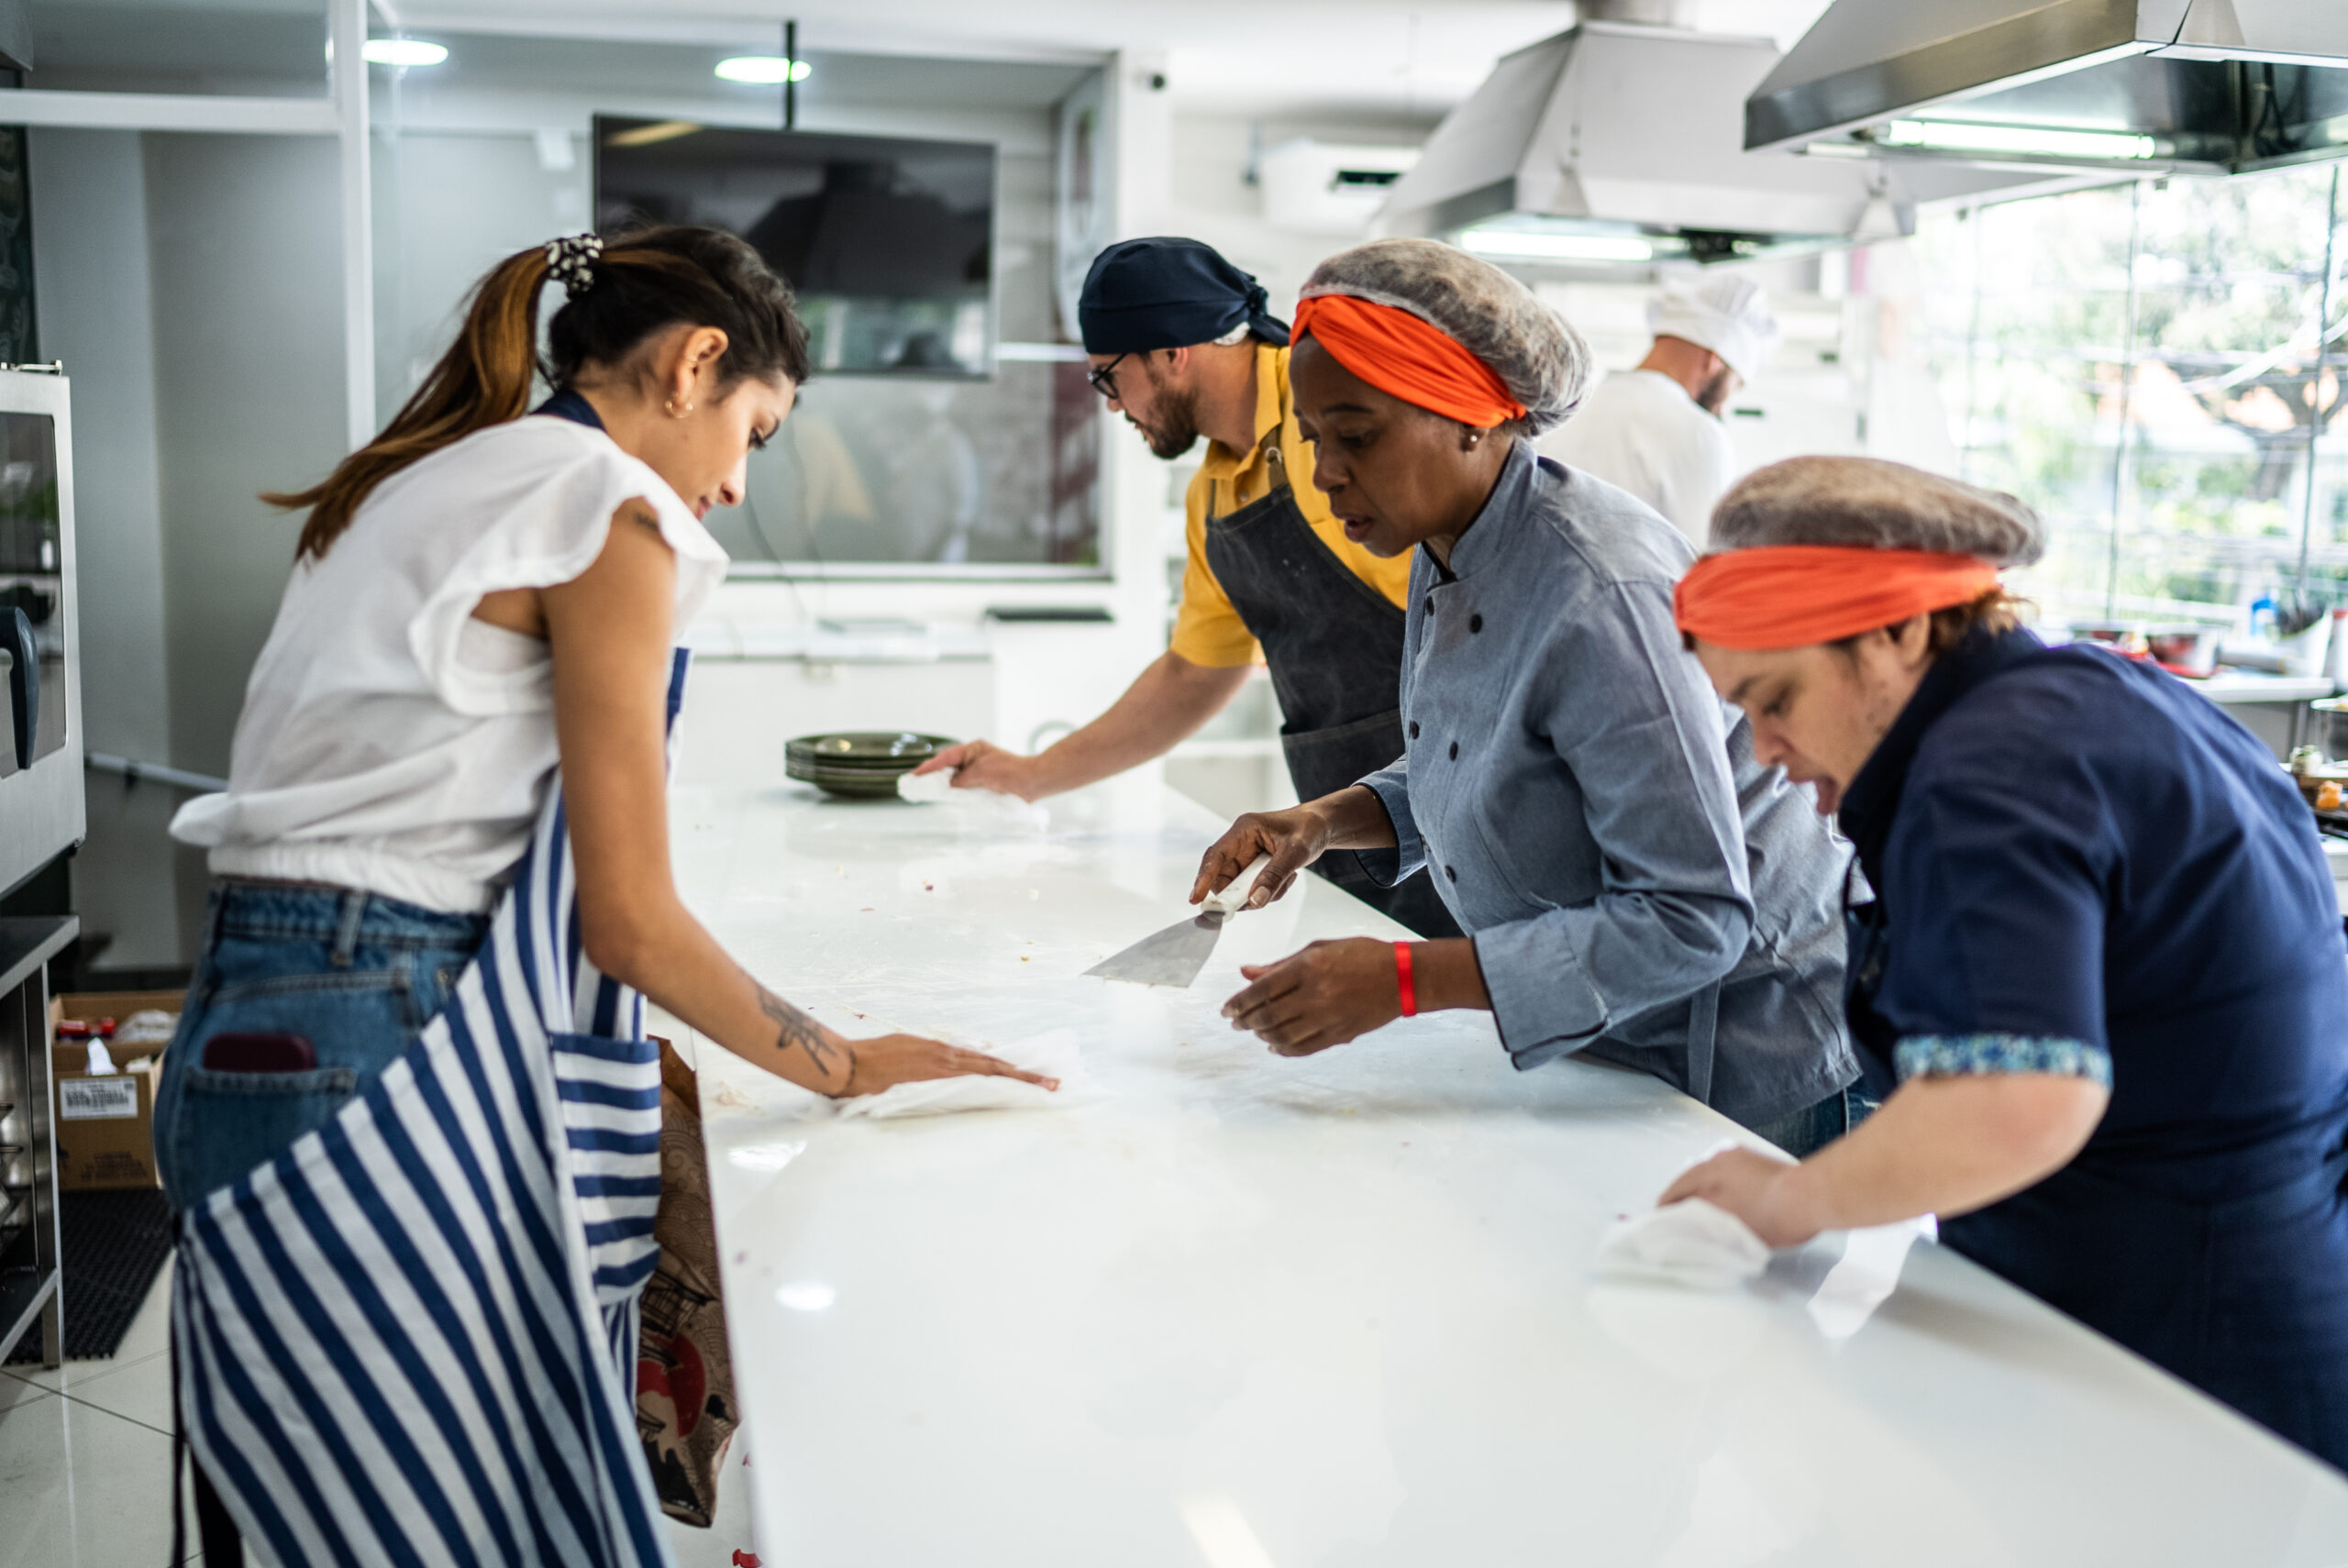 What to Expect in a Basic Food Hygiene Course: Key Topics and Learning Outcomes